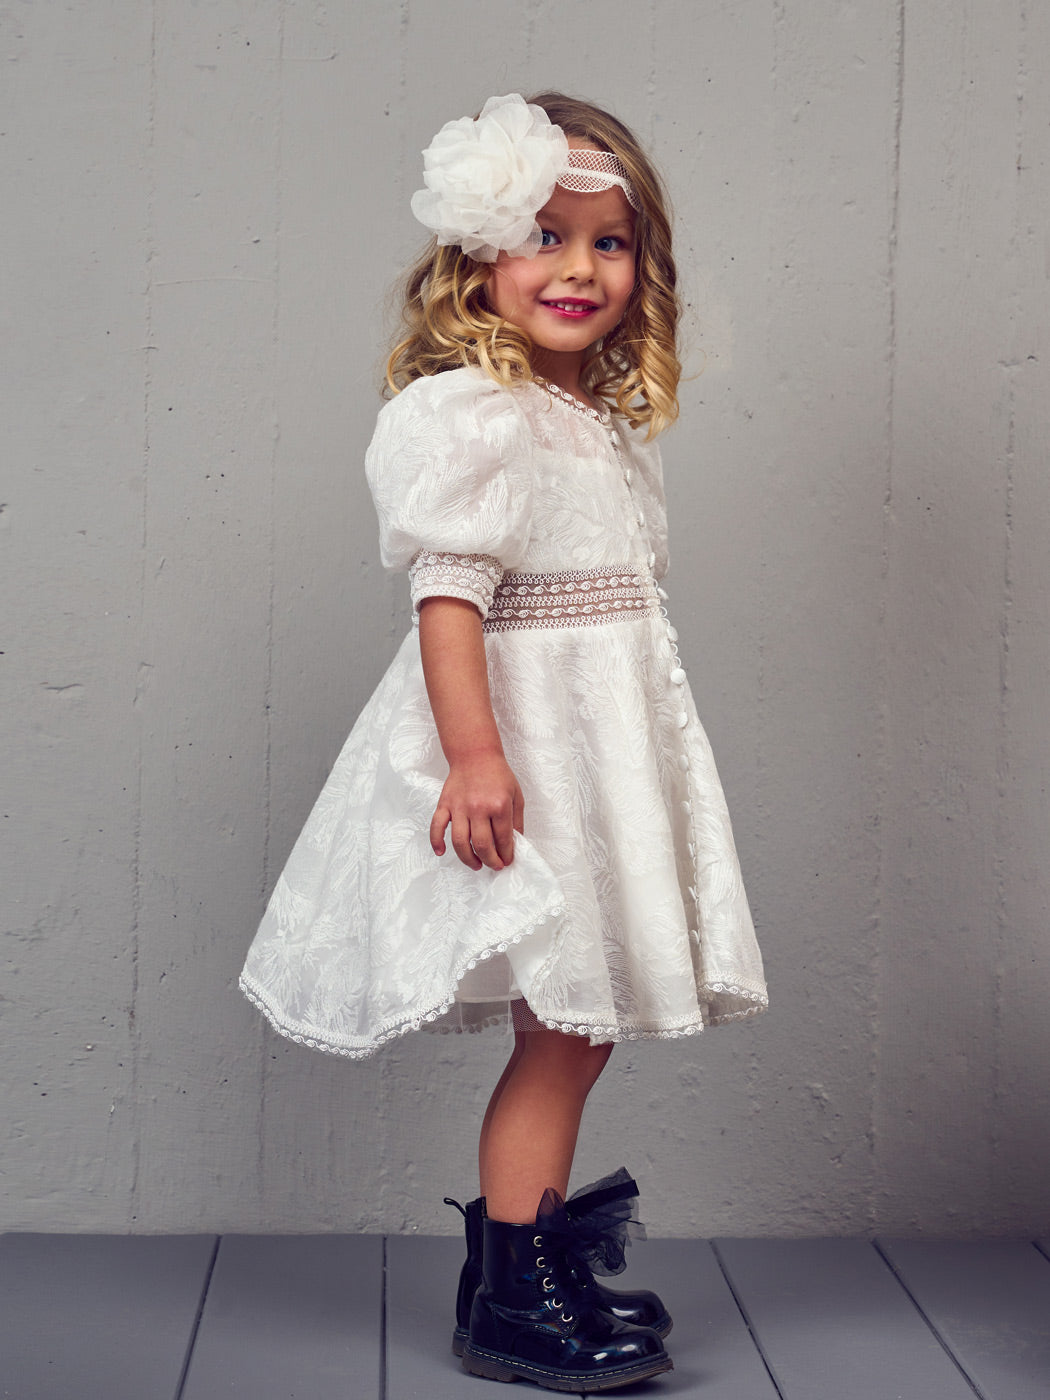 Baptism silk dress with embroidery - STELLA QUEEN